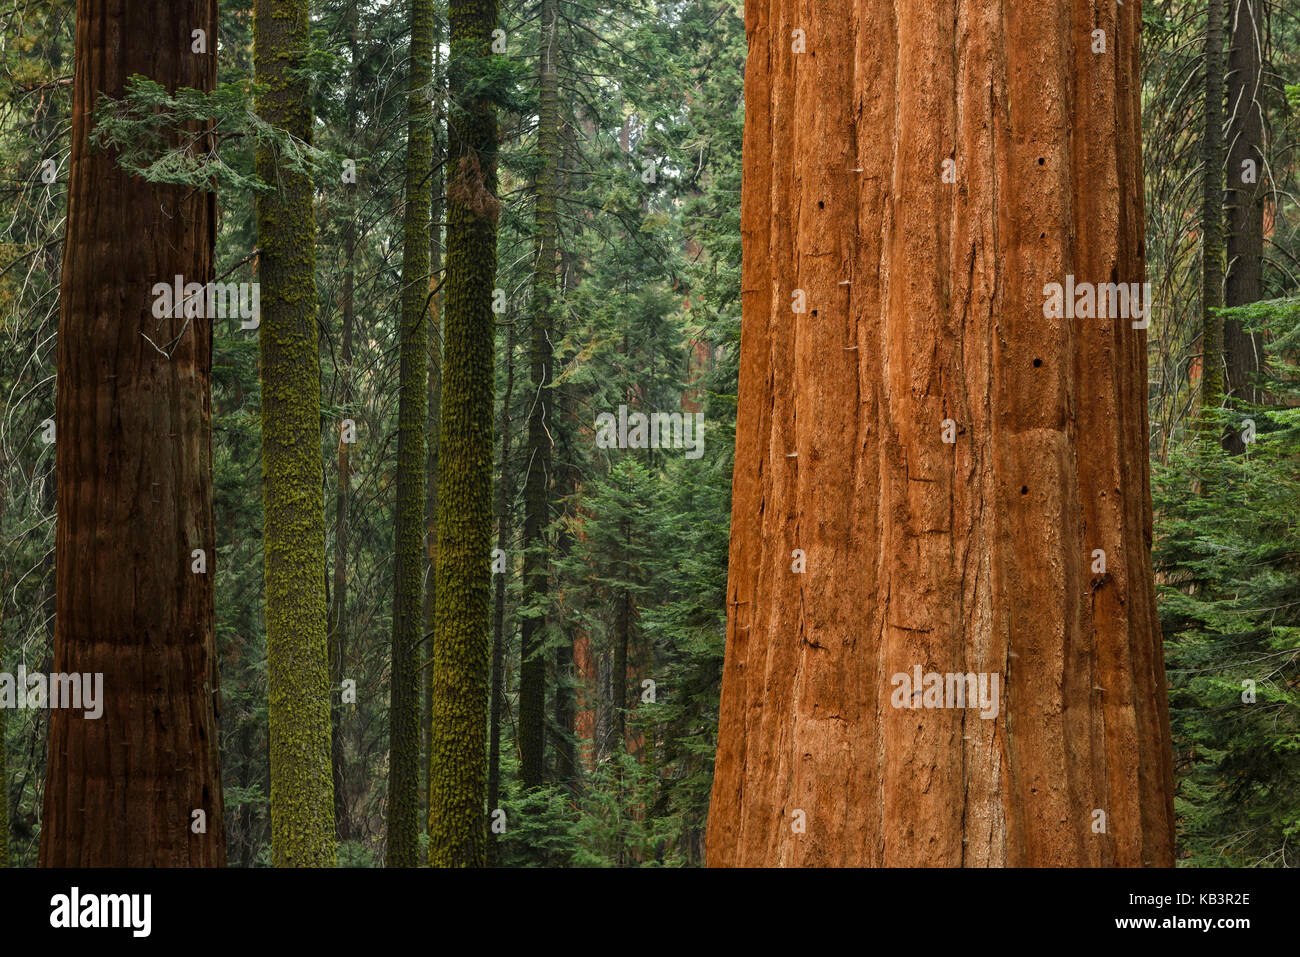 Riesige rote Holz in Kings Canyon National Park, Kalifornien, USA Stockfoto